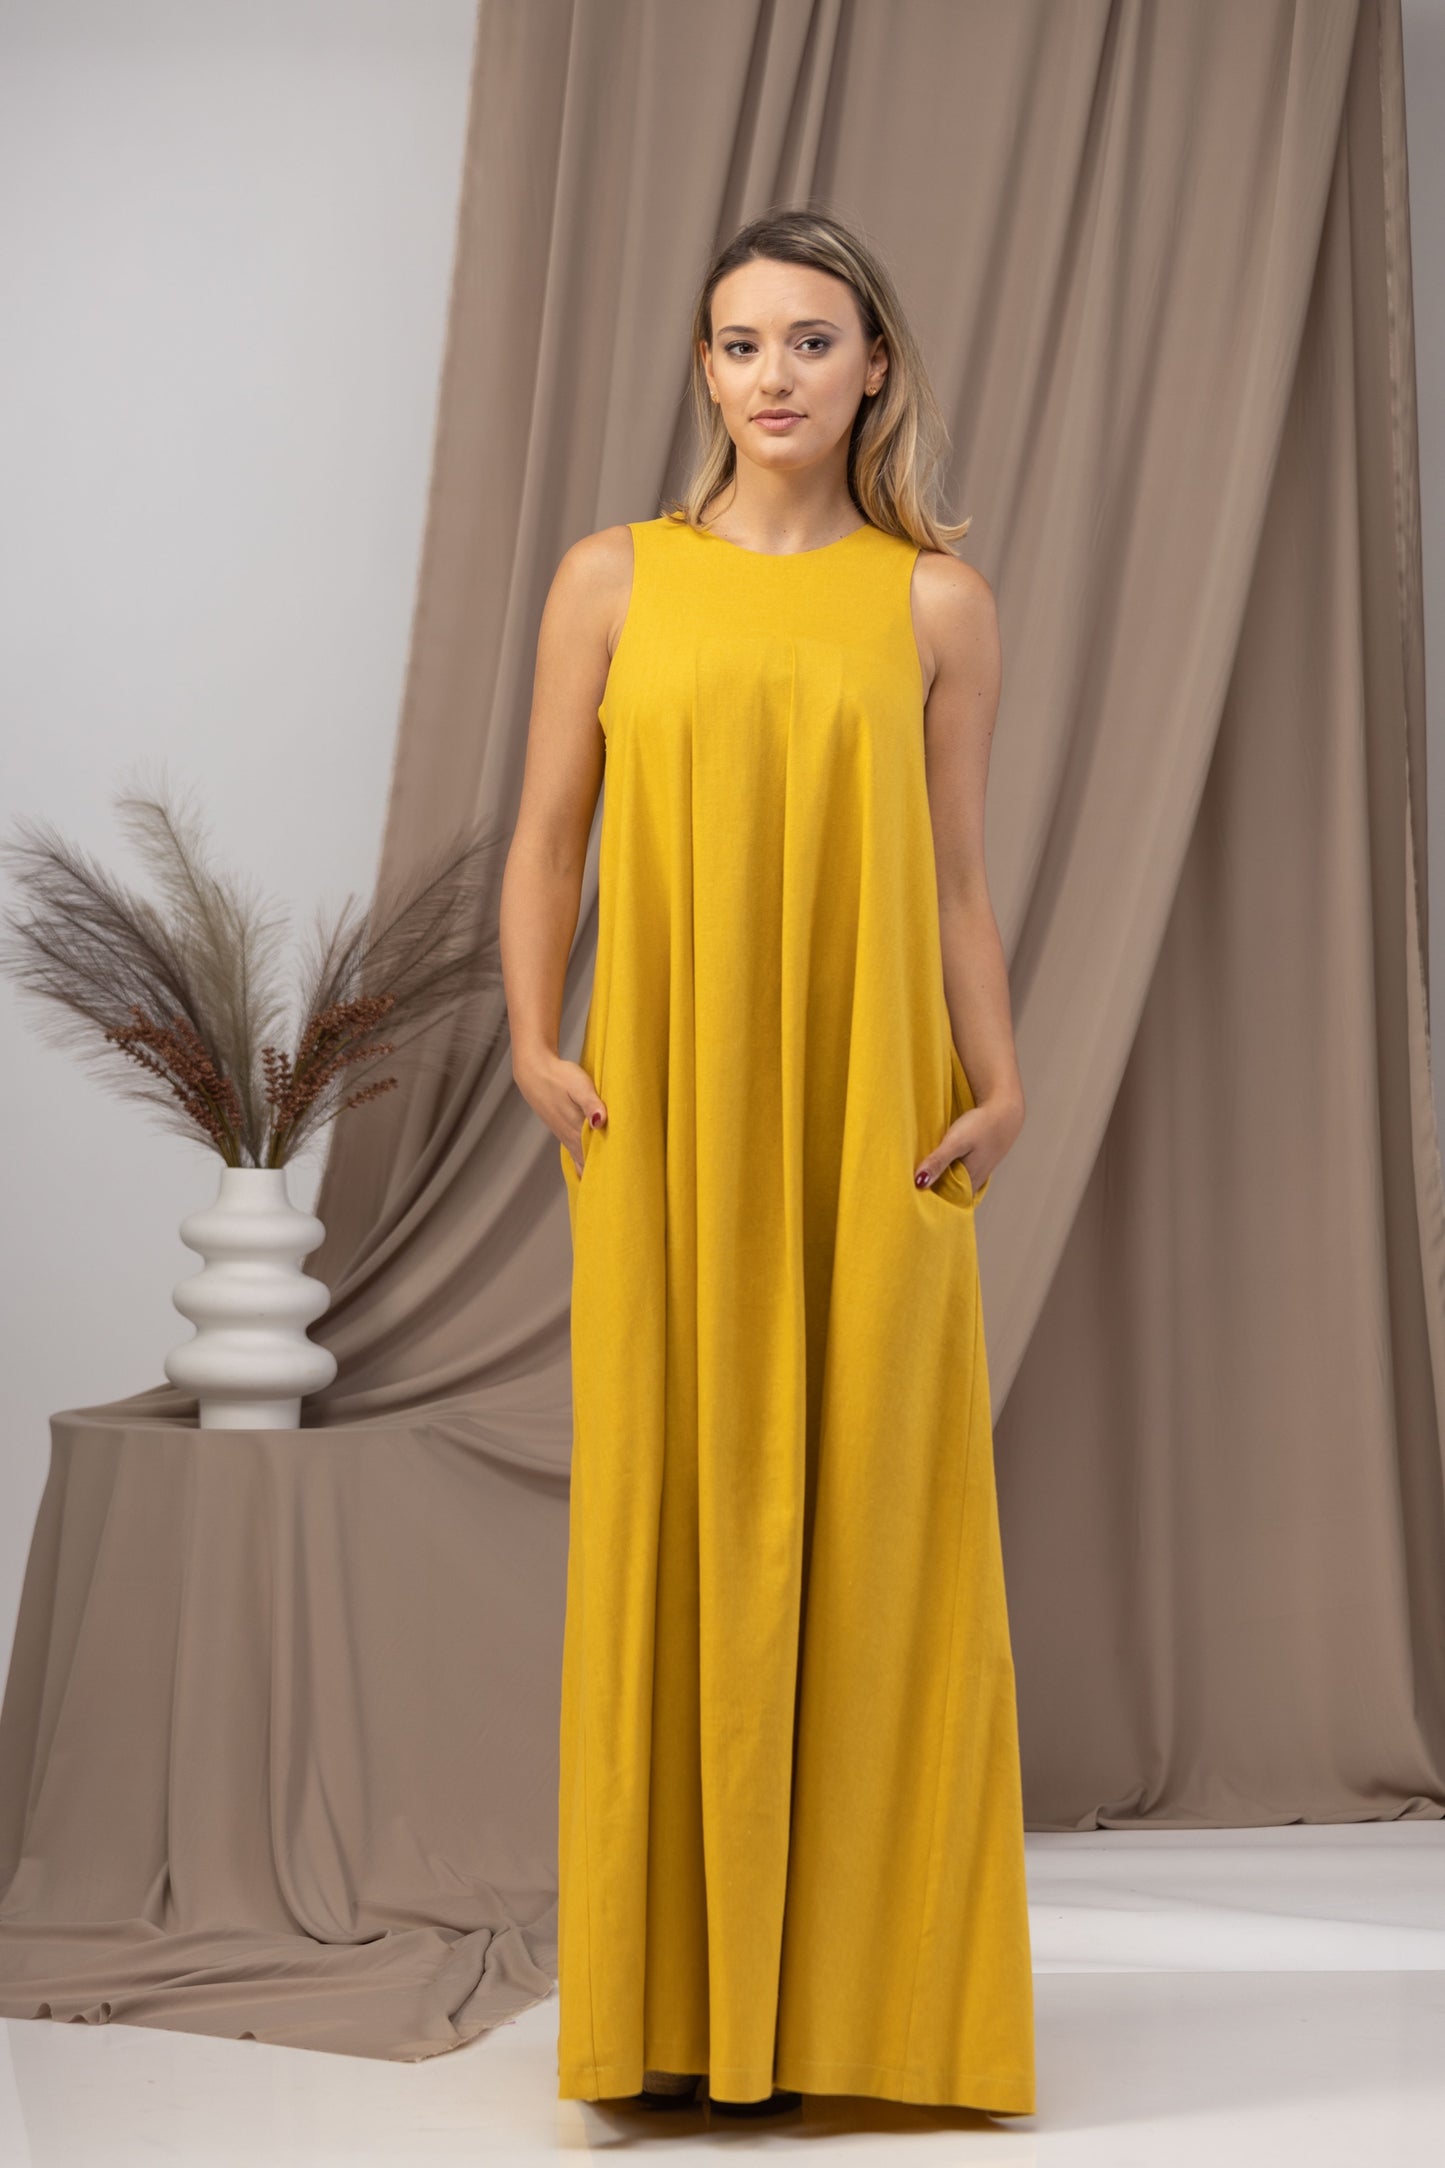 Loose Linen Maxi Dress in a natural color - from NikkaPlace | Effortless fashion for easy living